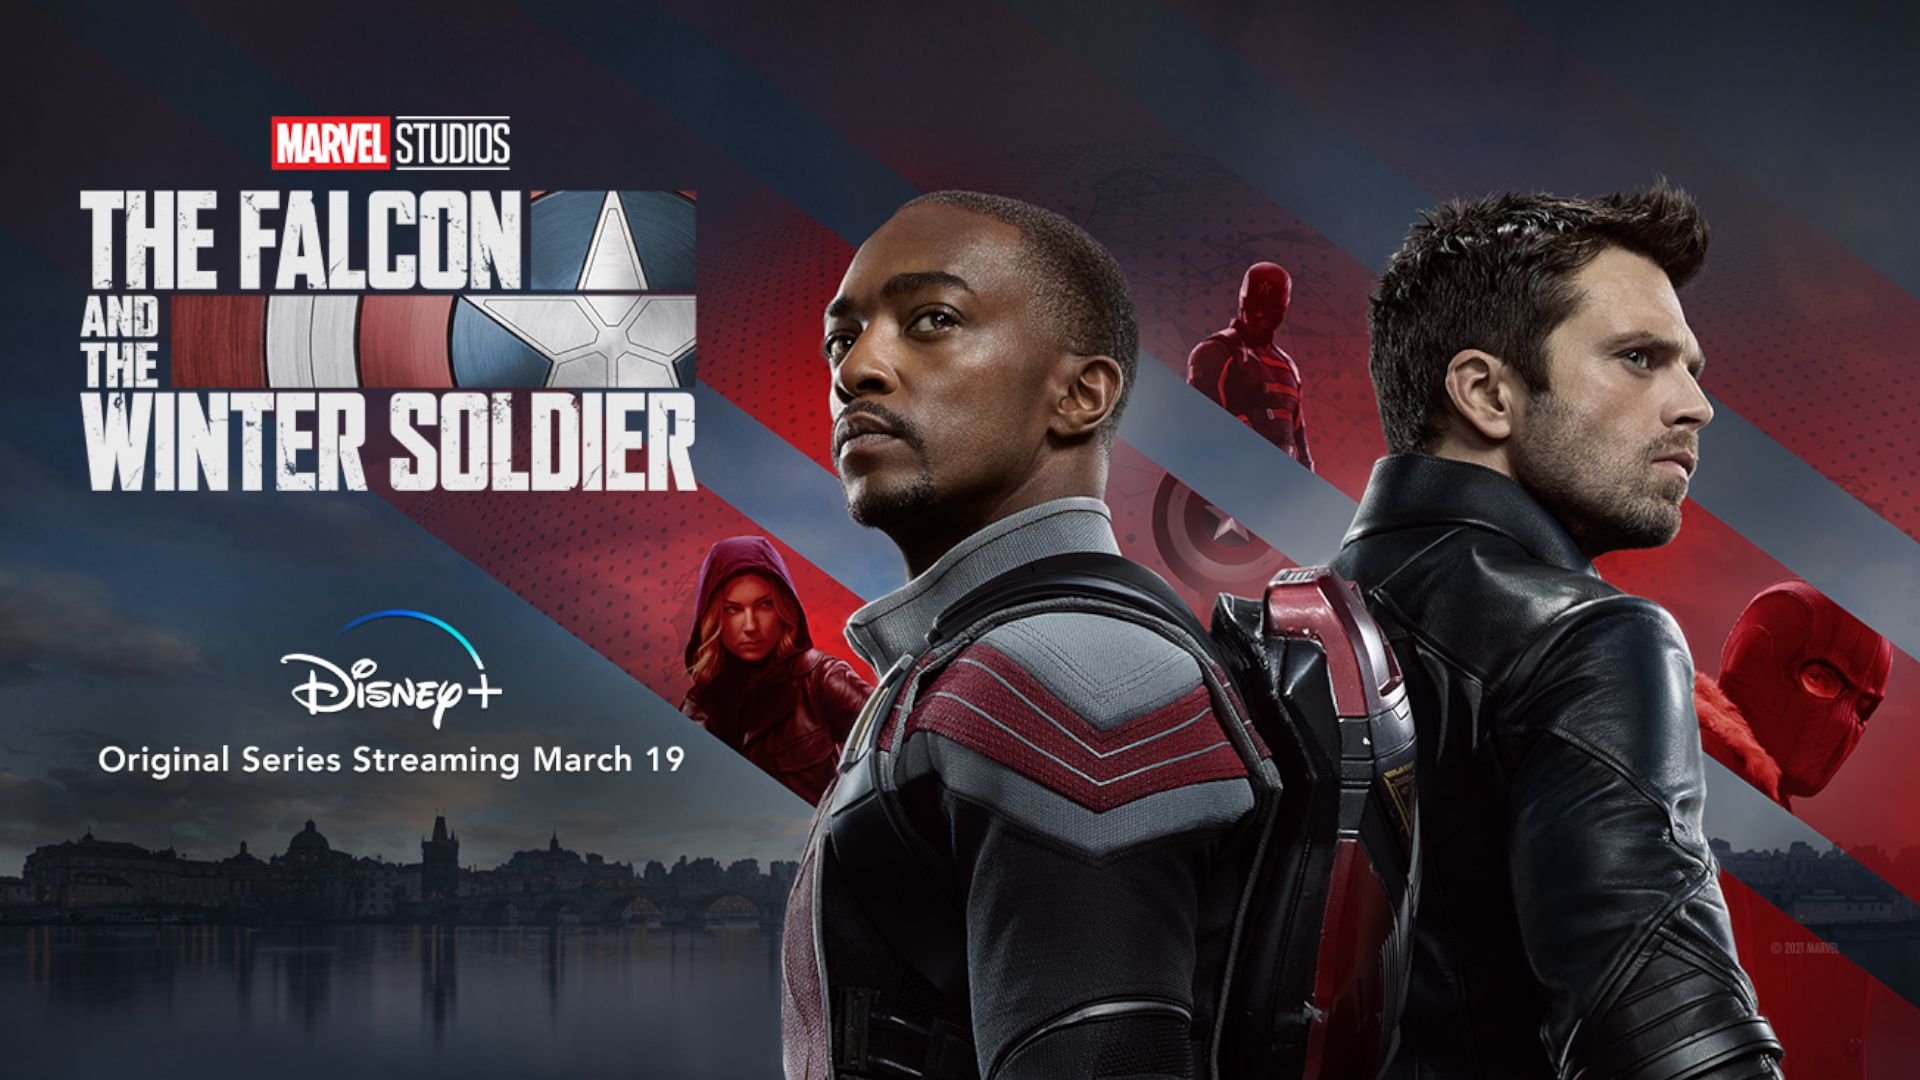 How to watch The Falcon and the Winter Soldier online